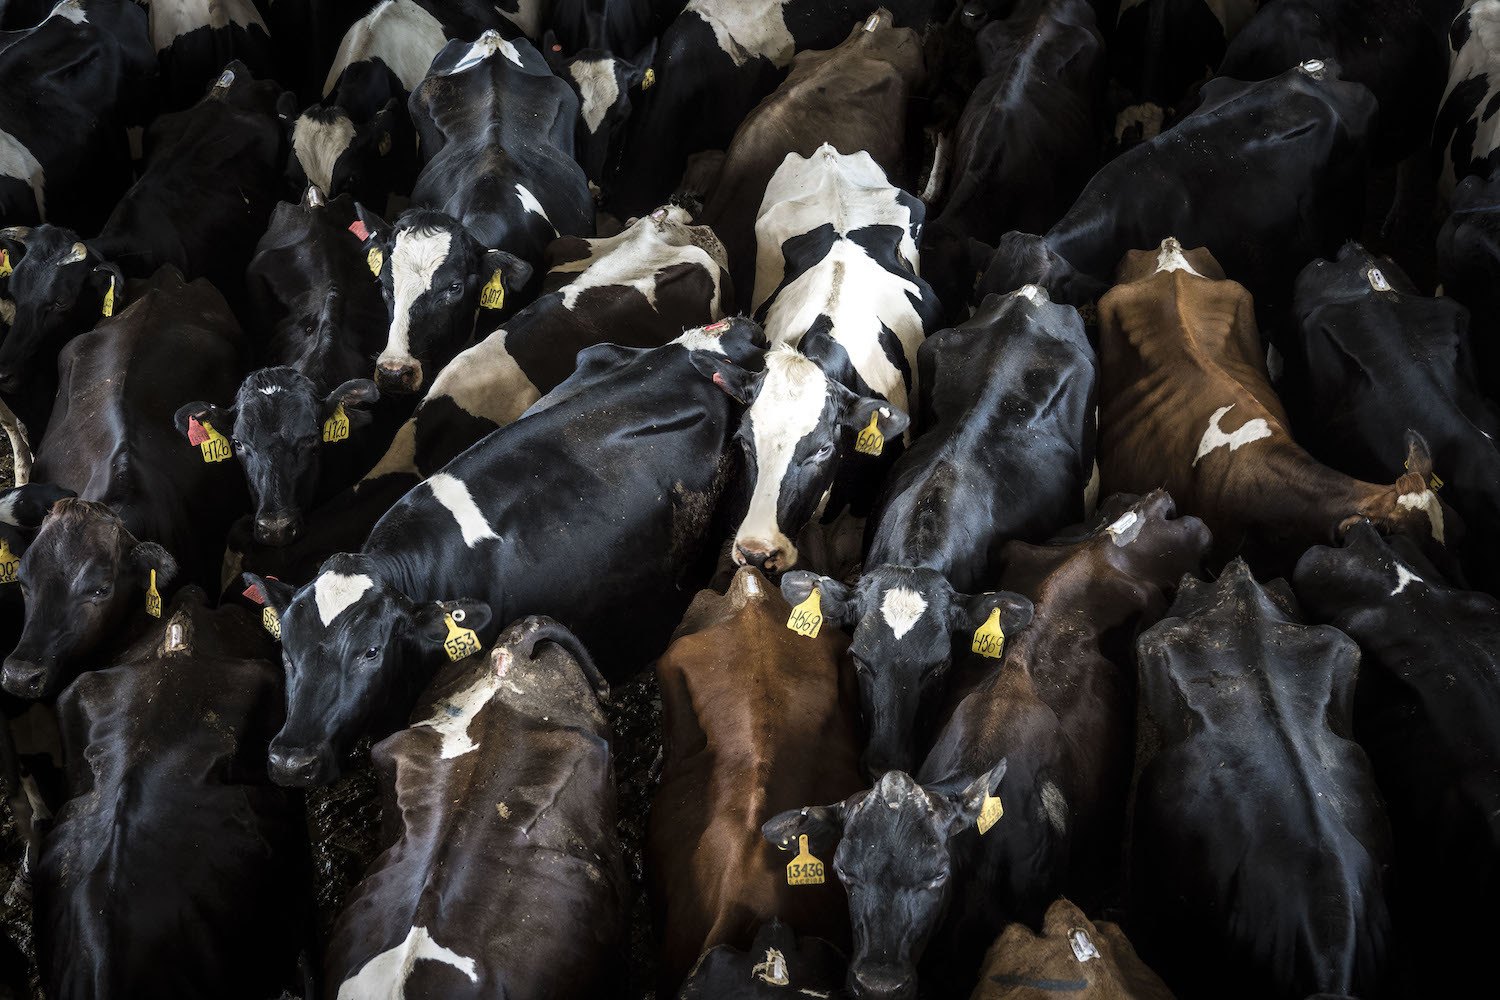 An aerial view of a herd of dairy cows in Puerto Rico. January 2021